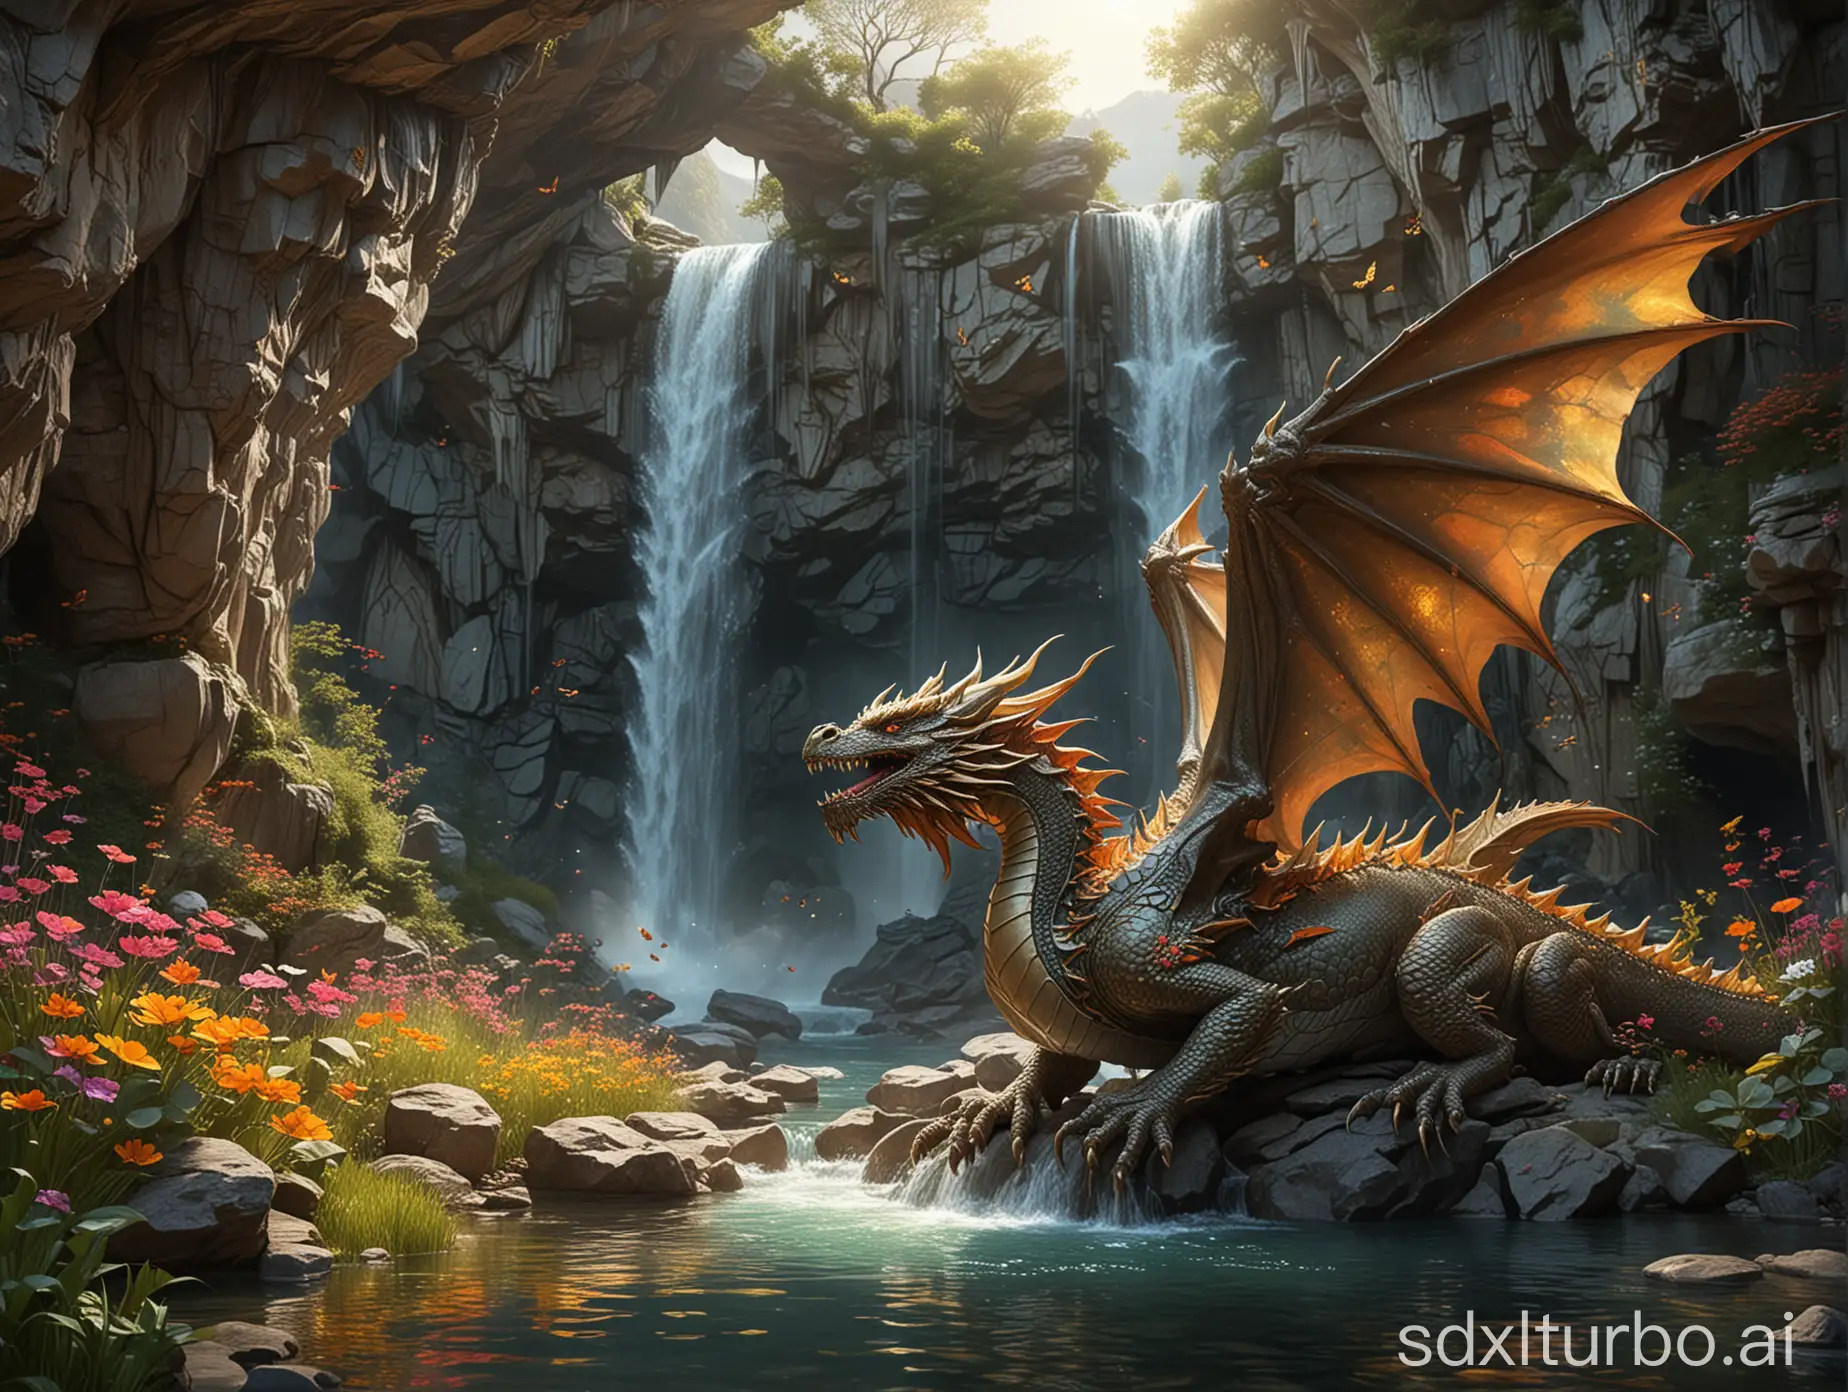 The entrance to the grotto is guarded by a huge beautiful and wise dragon with folded wings, its scales glistening silver and gold.Mystical, beautiful, magical waterfall, spews from the rock in the underground high grotto jets of water, shimmering with colorful sparks.  The colorful sparks are reflected on the surface of the water.  Below the waterfall, there is a lake, from which streams flow outward to a beautiful meadow where flowers grow and butterflies fly. , sf, intricate artwork masterpiece, ominous, matte painting movie poster, golden ratio, trending on cgsociety, intricate, epic, trending on artstation, by artgerm, h. r. giger and beksinski, highly detailed, vibrant, production cinematic character render, ultra high quality model